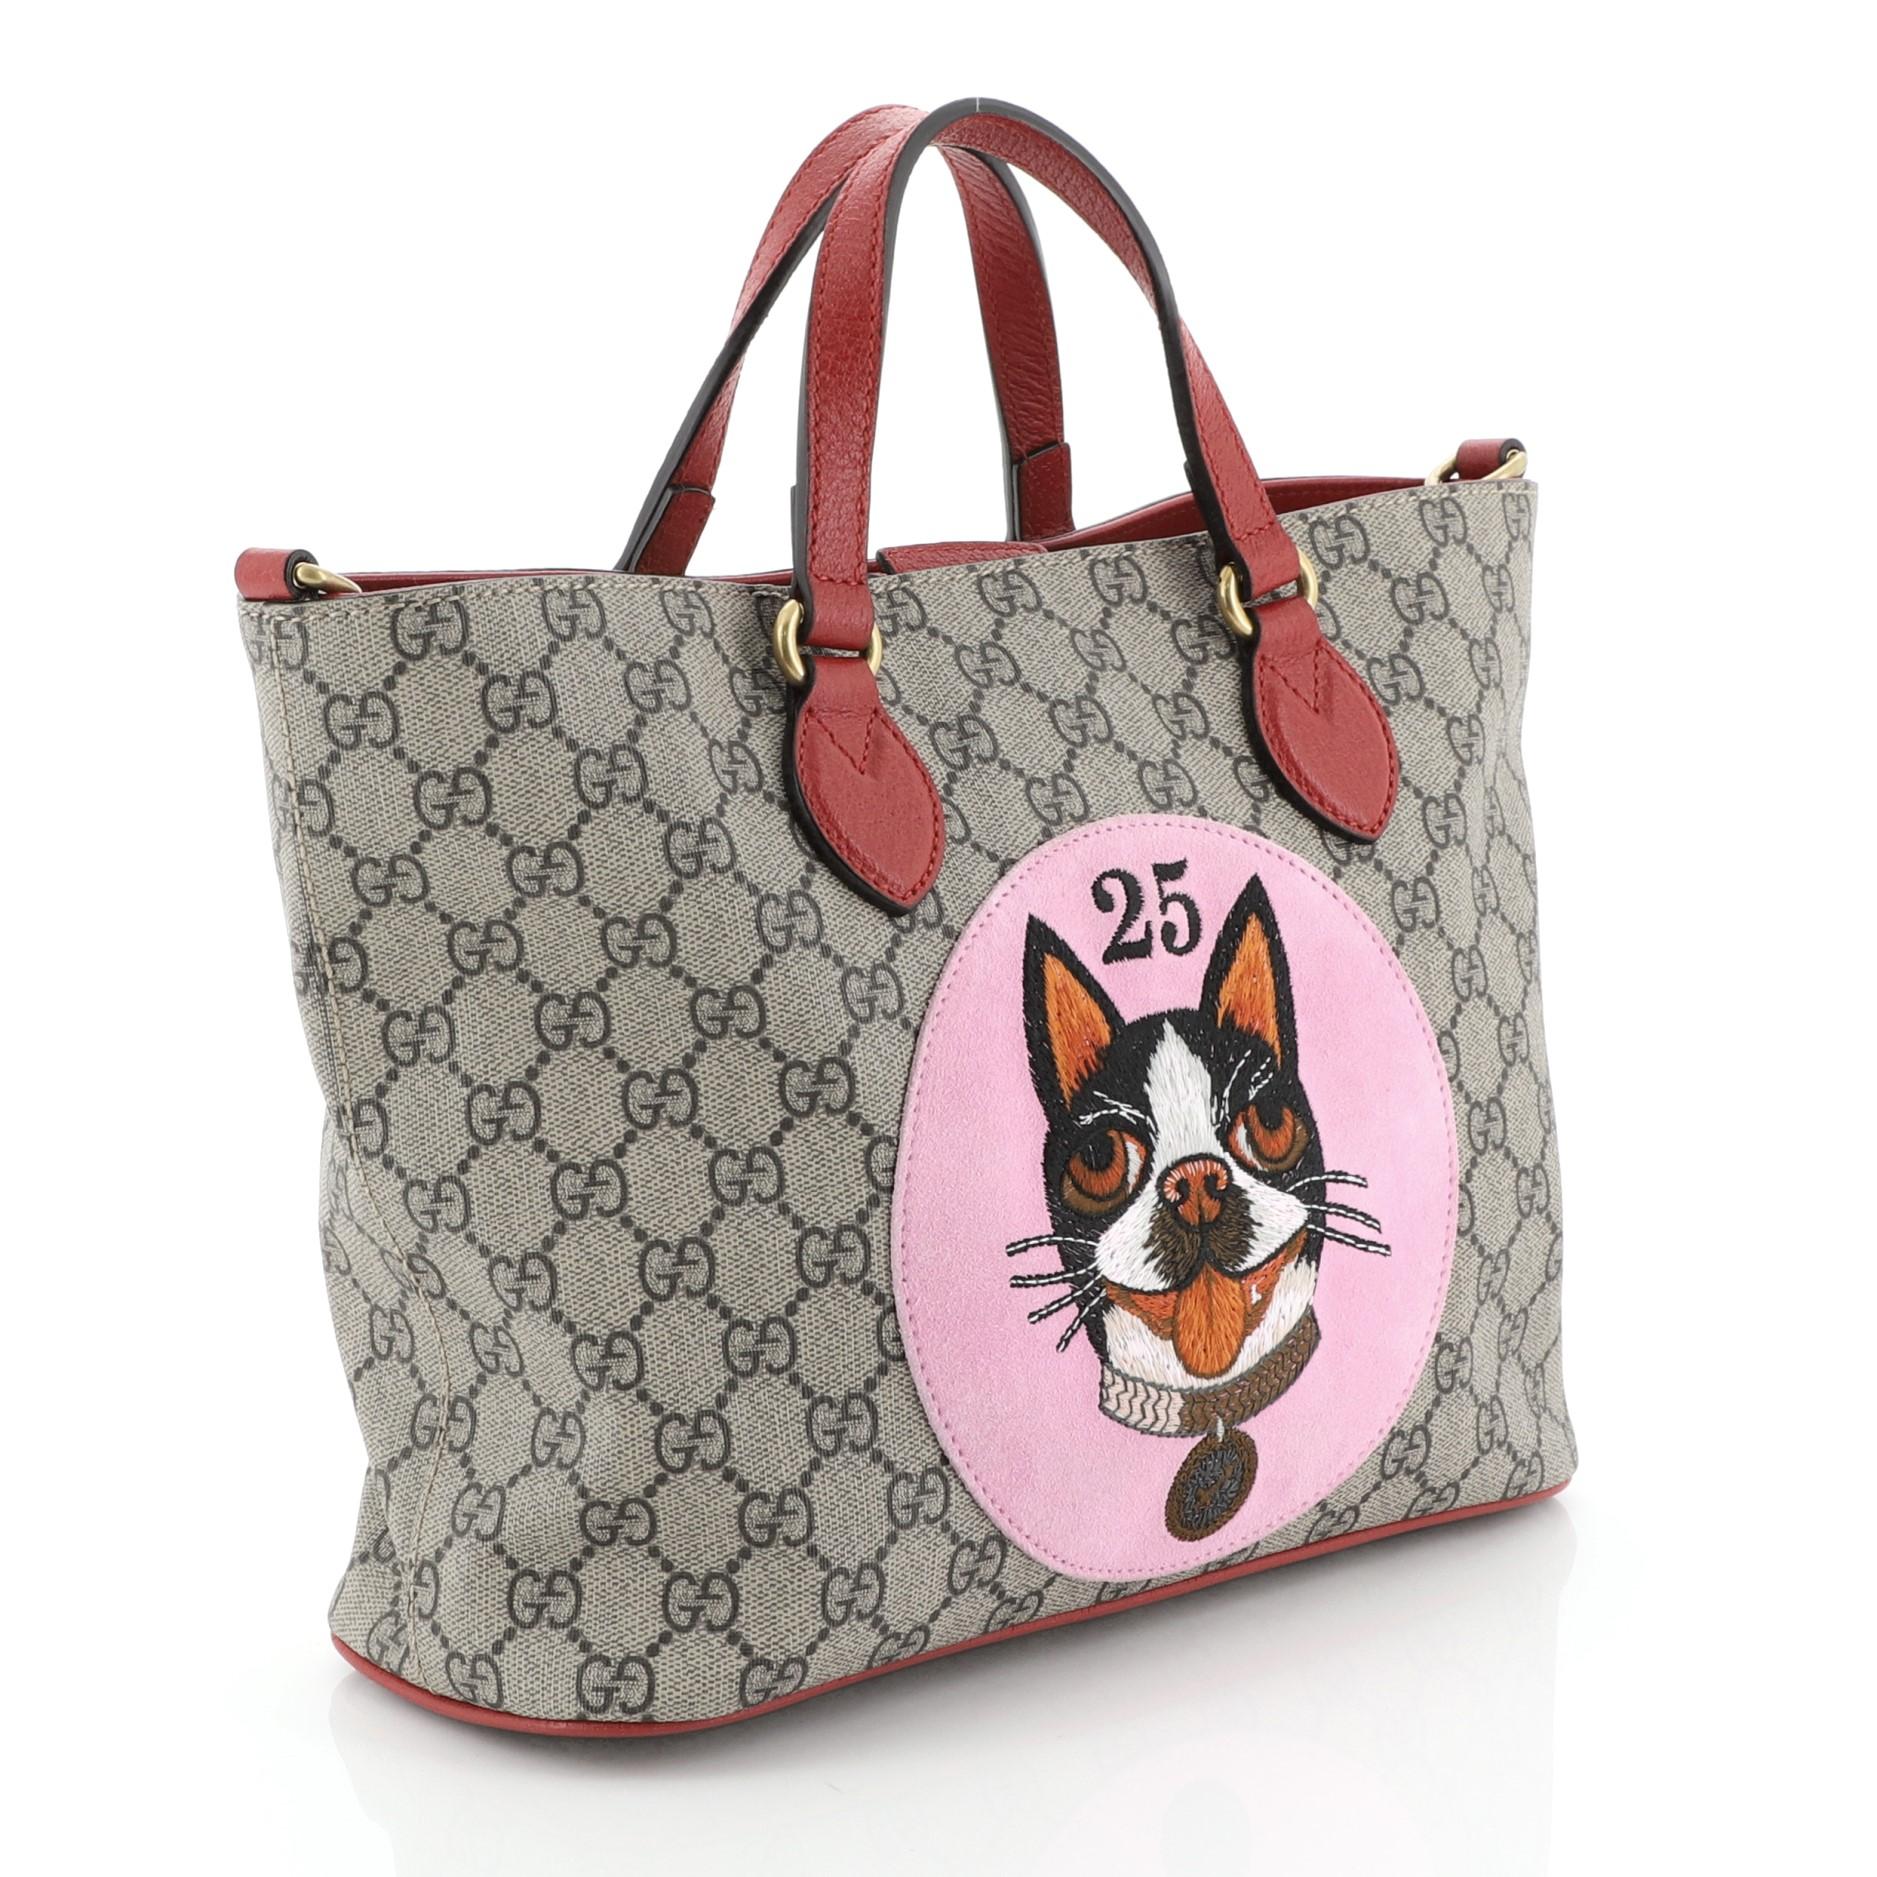 This Gucci Convertible Soft Tote Bosco Print GG Coated Canvas Small, crafted in brown GG coated canvas, features dual flat leather handles, a suede patch with the image of Bosco the Boston terrier, and aged gold-tone hardware. Its magnetic closure